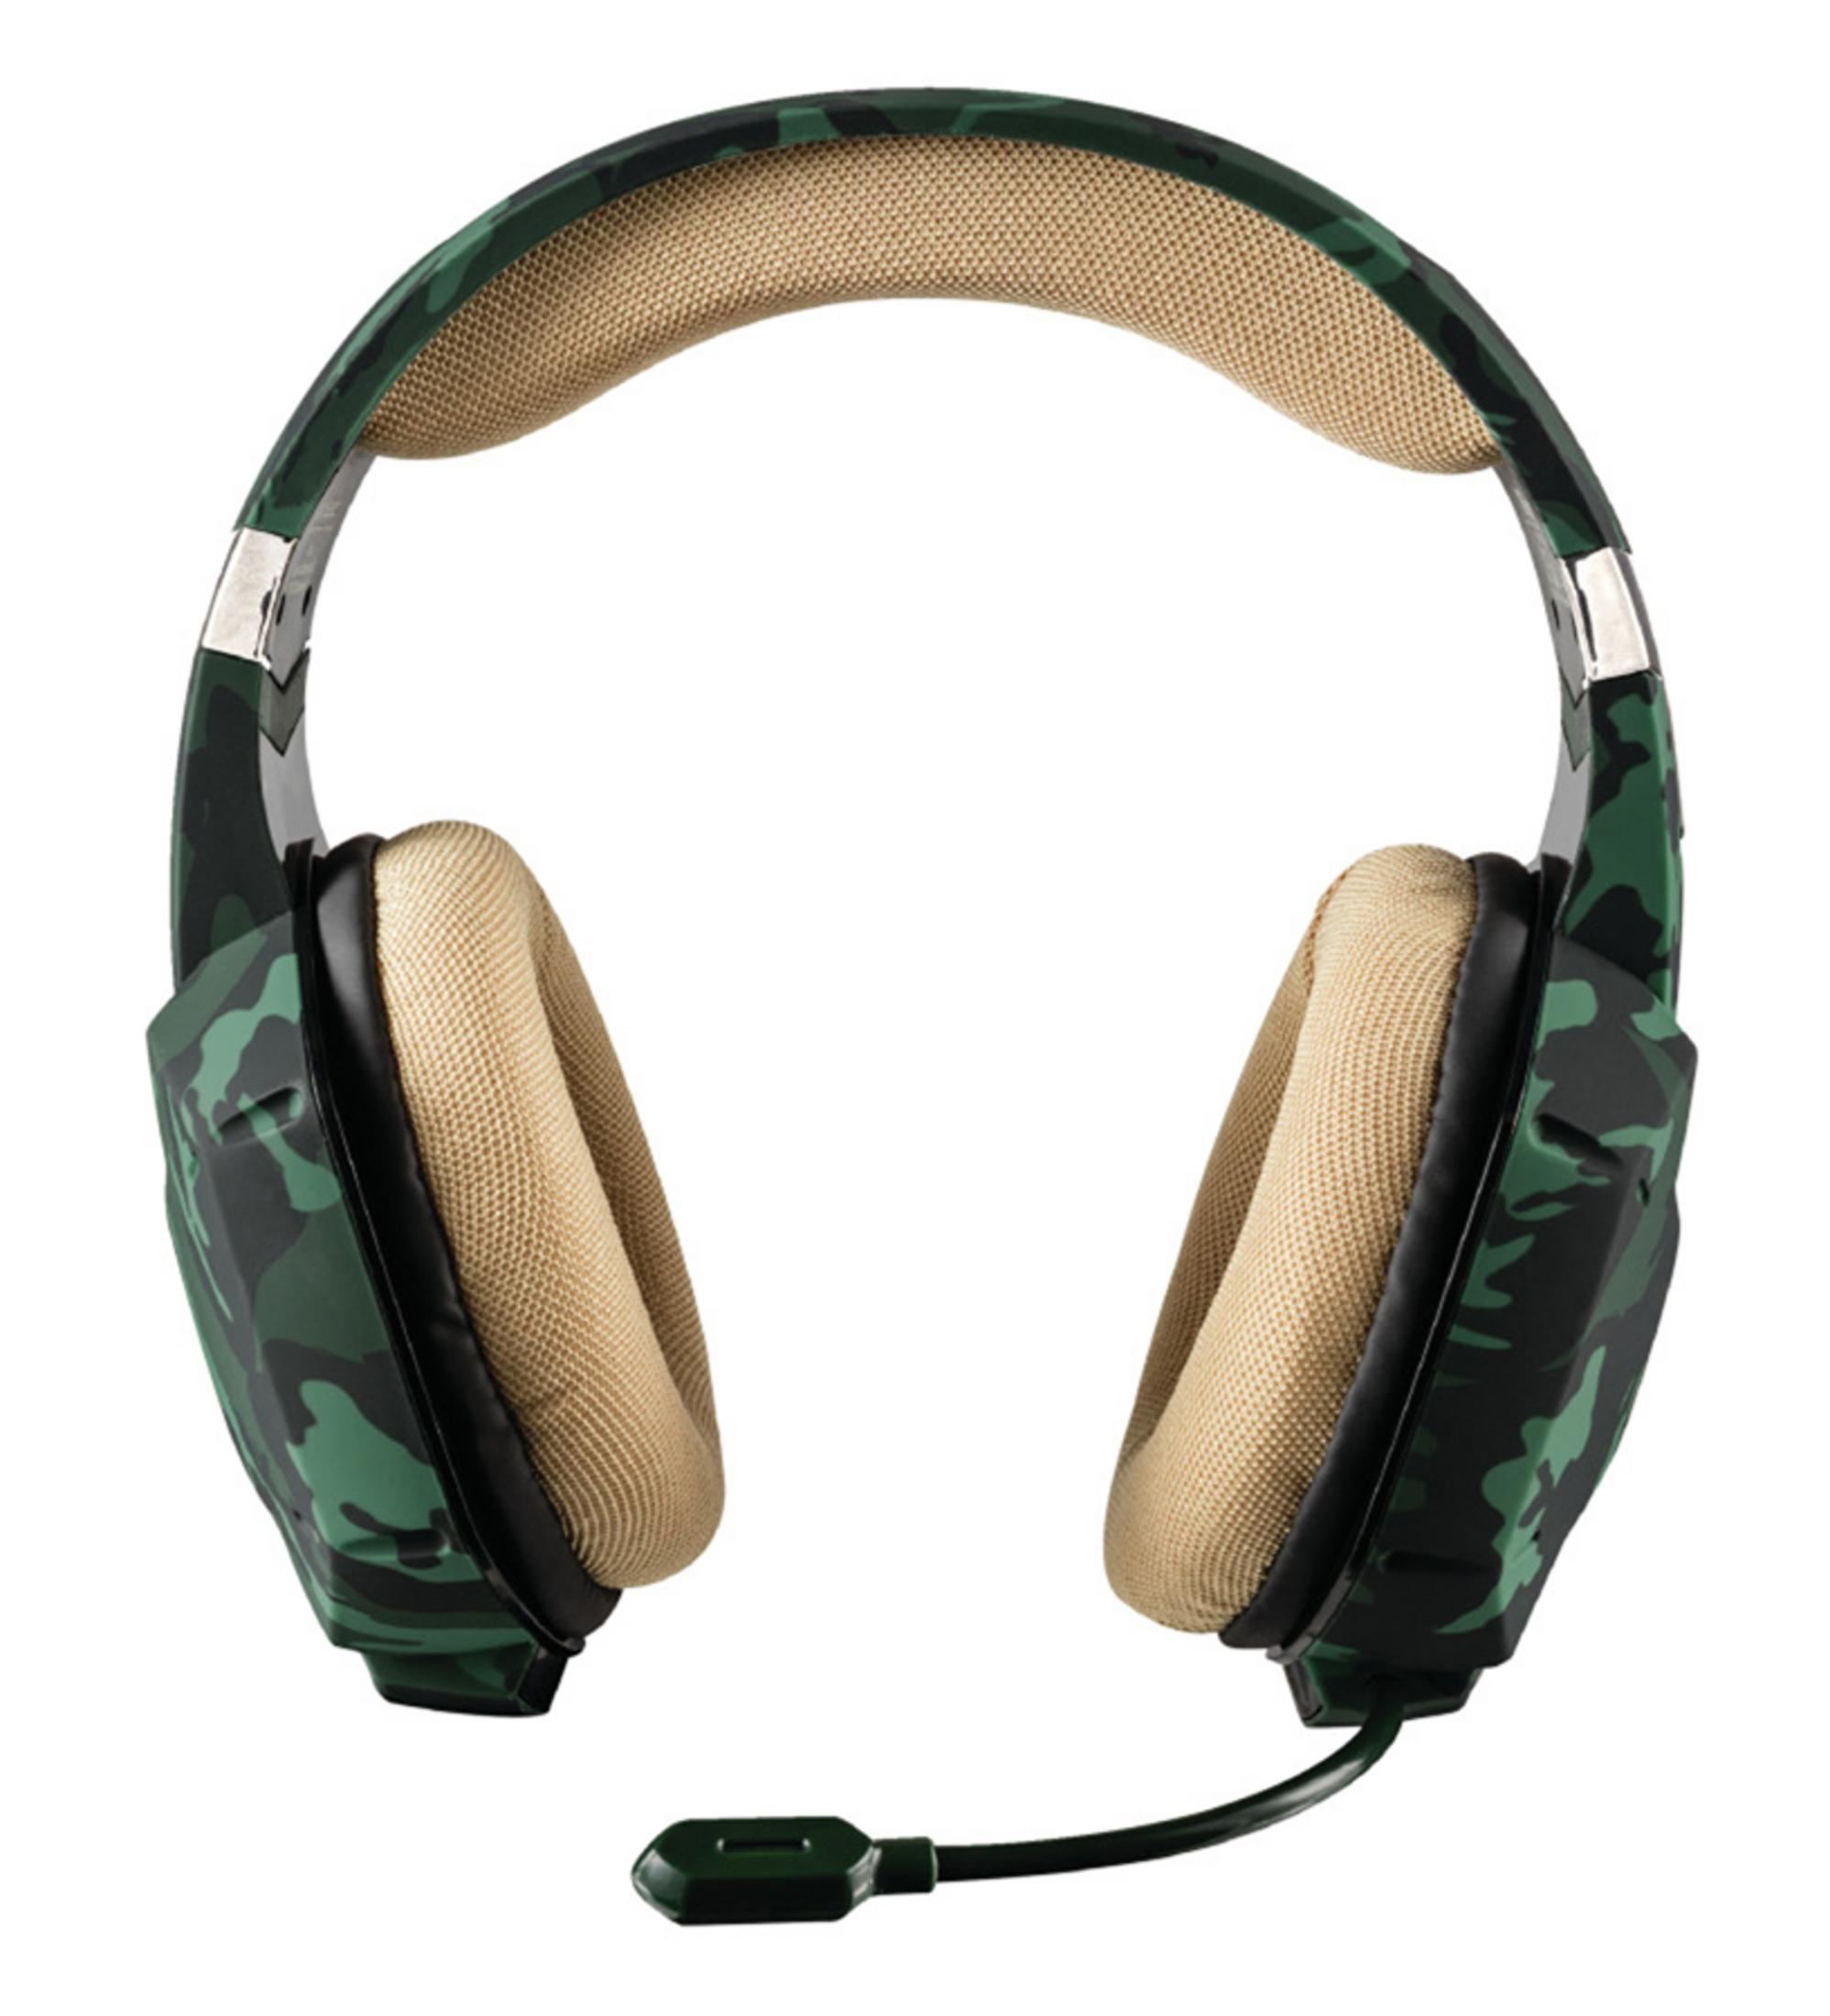 TRUST 20865 GXT 322C GAMING HEADSET CAMOUFLAGE, Gaming GREEN In-ear Headset Grün/Camouflage